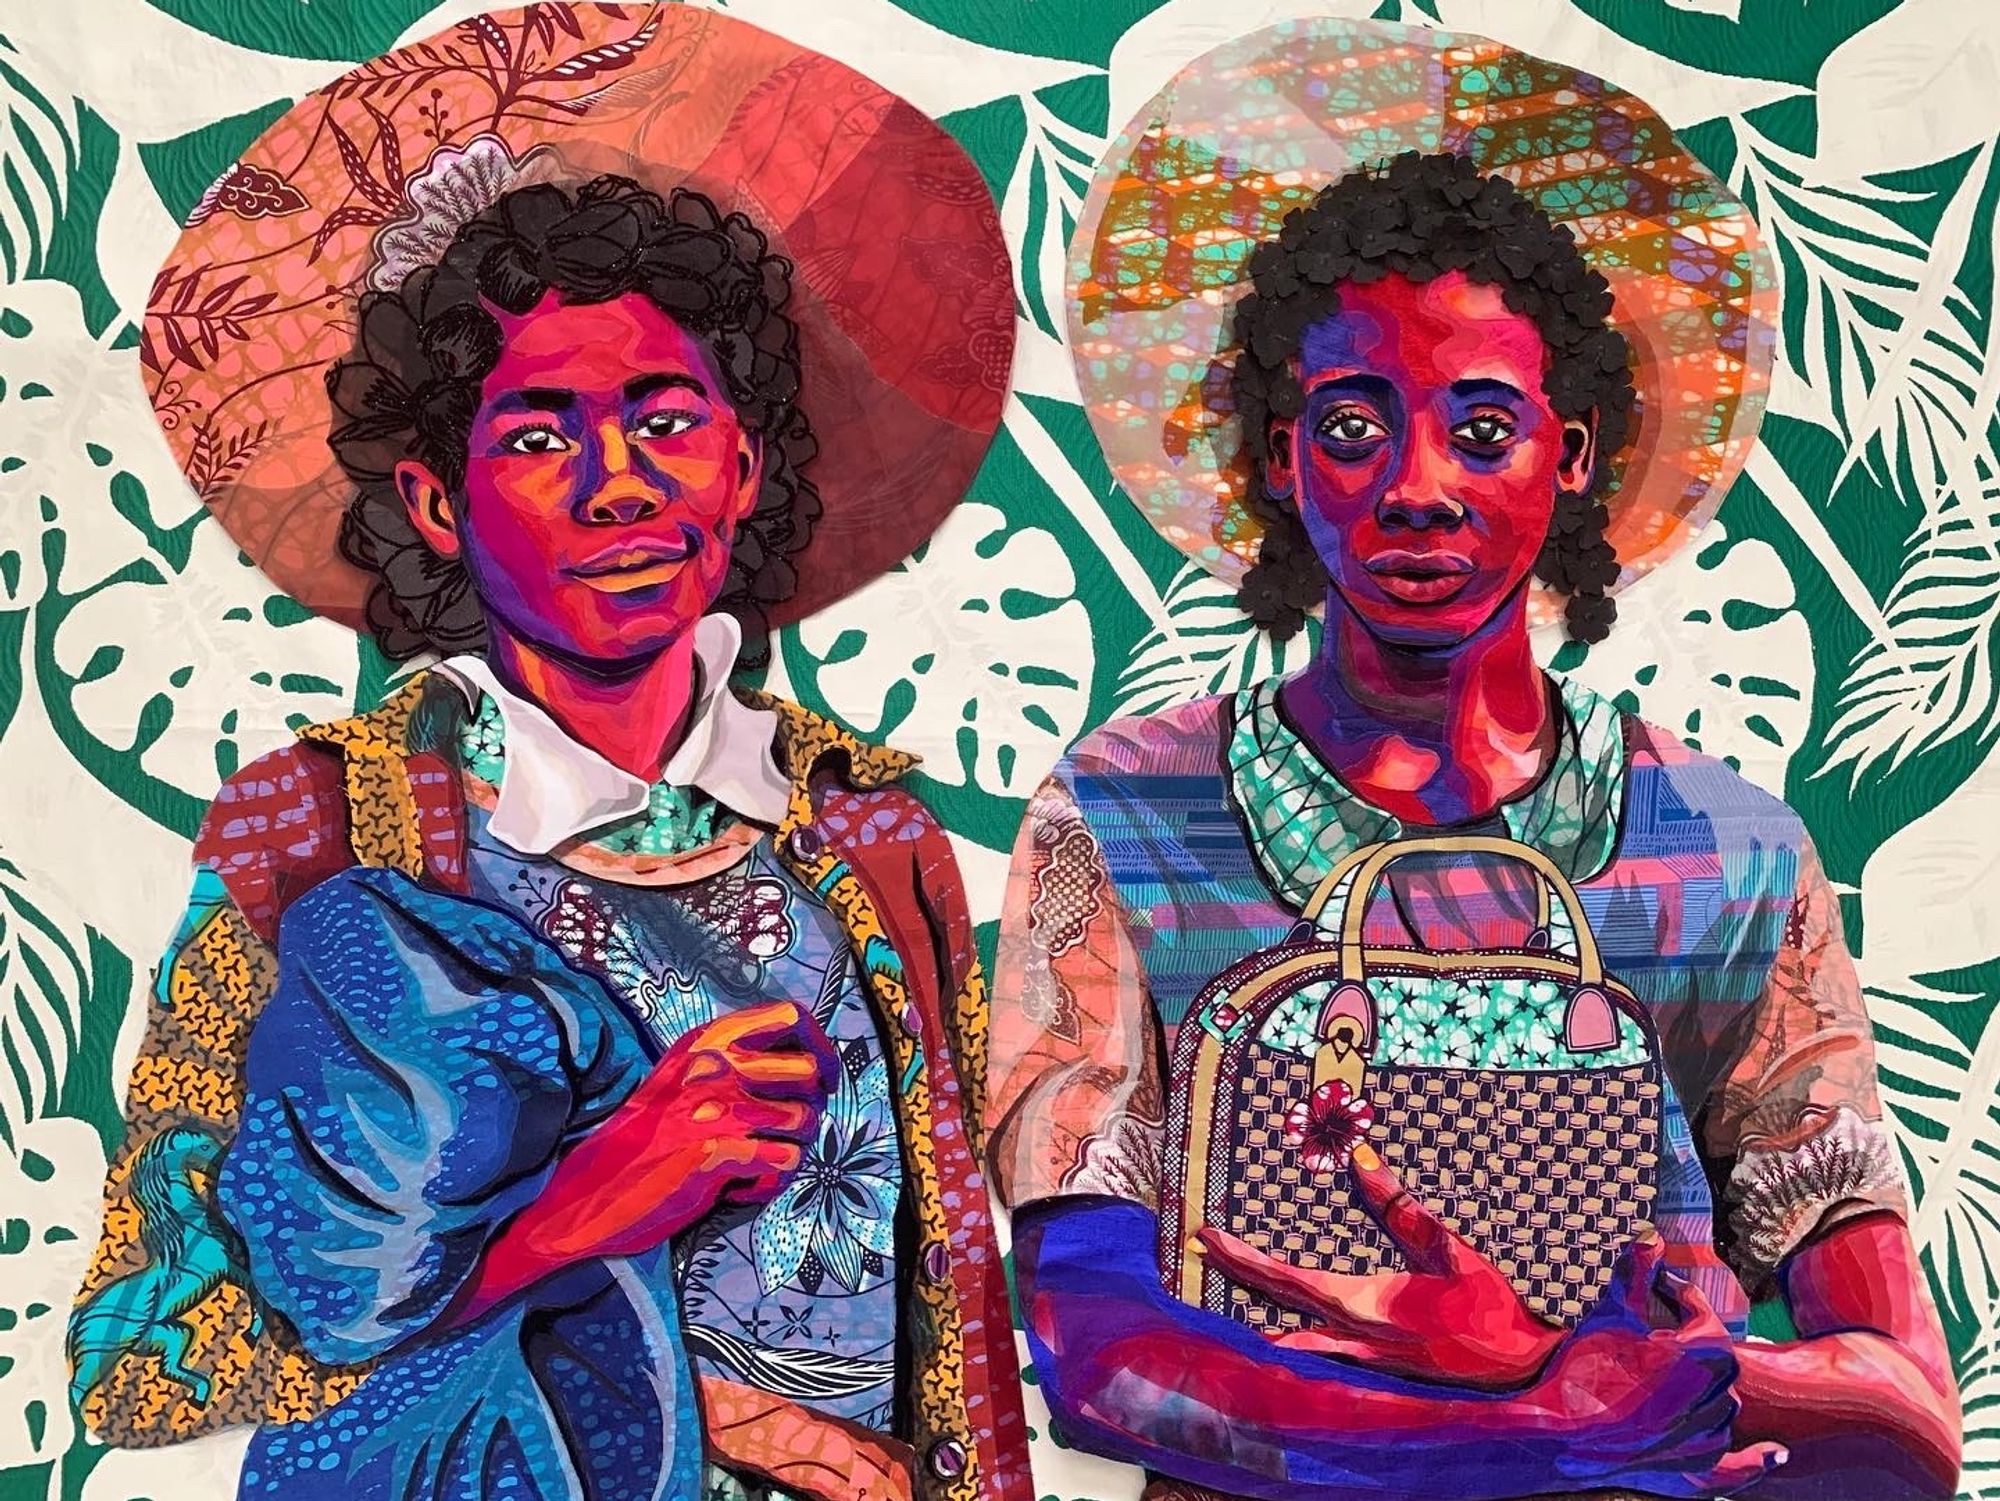 Bisa Butler Summons Black History In Her Quilted Arts to Motivate the Fight for Black Lives